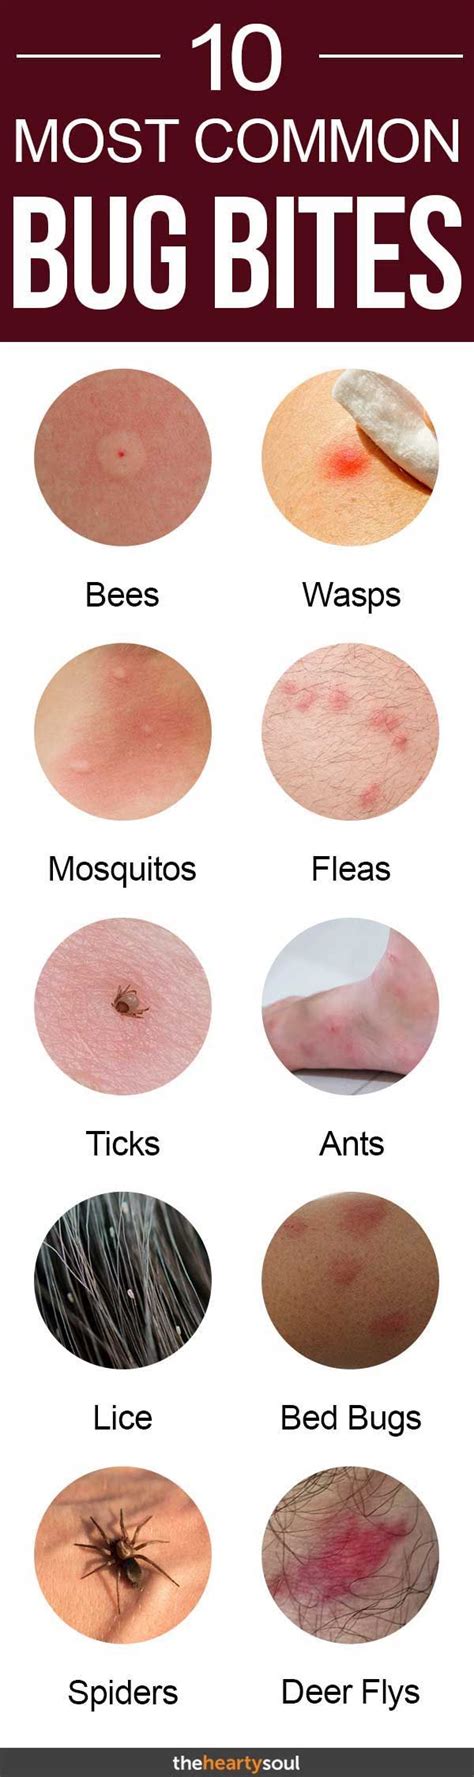 Bug Bites Can Be Itchy And Frustrating Some Can Even Be Dangerous Heres How You Can Know